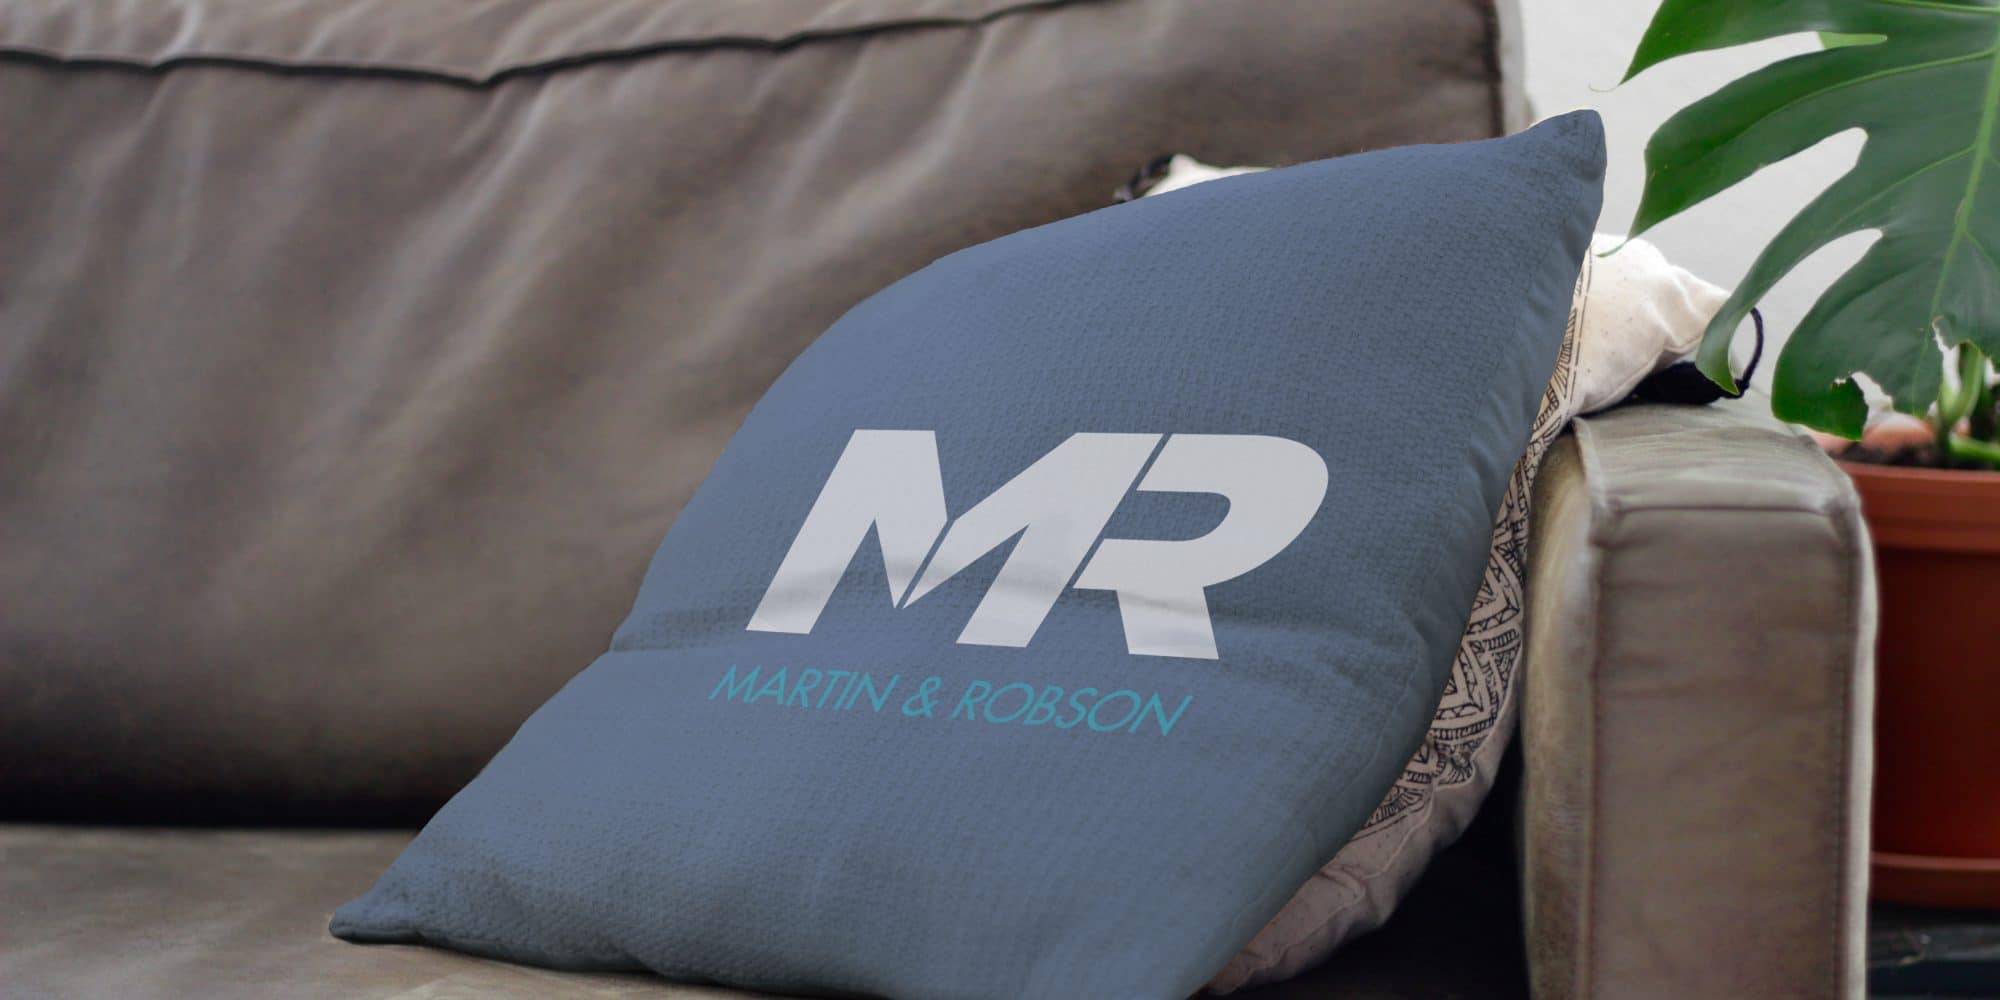 Martin and Robson logo on pillow